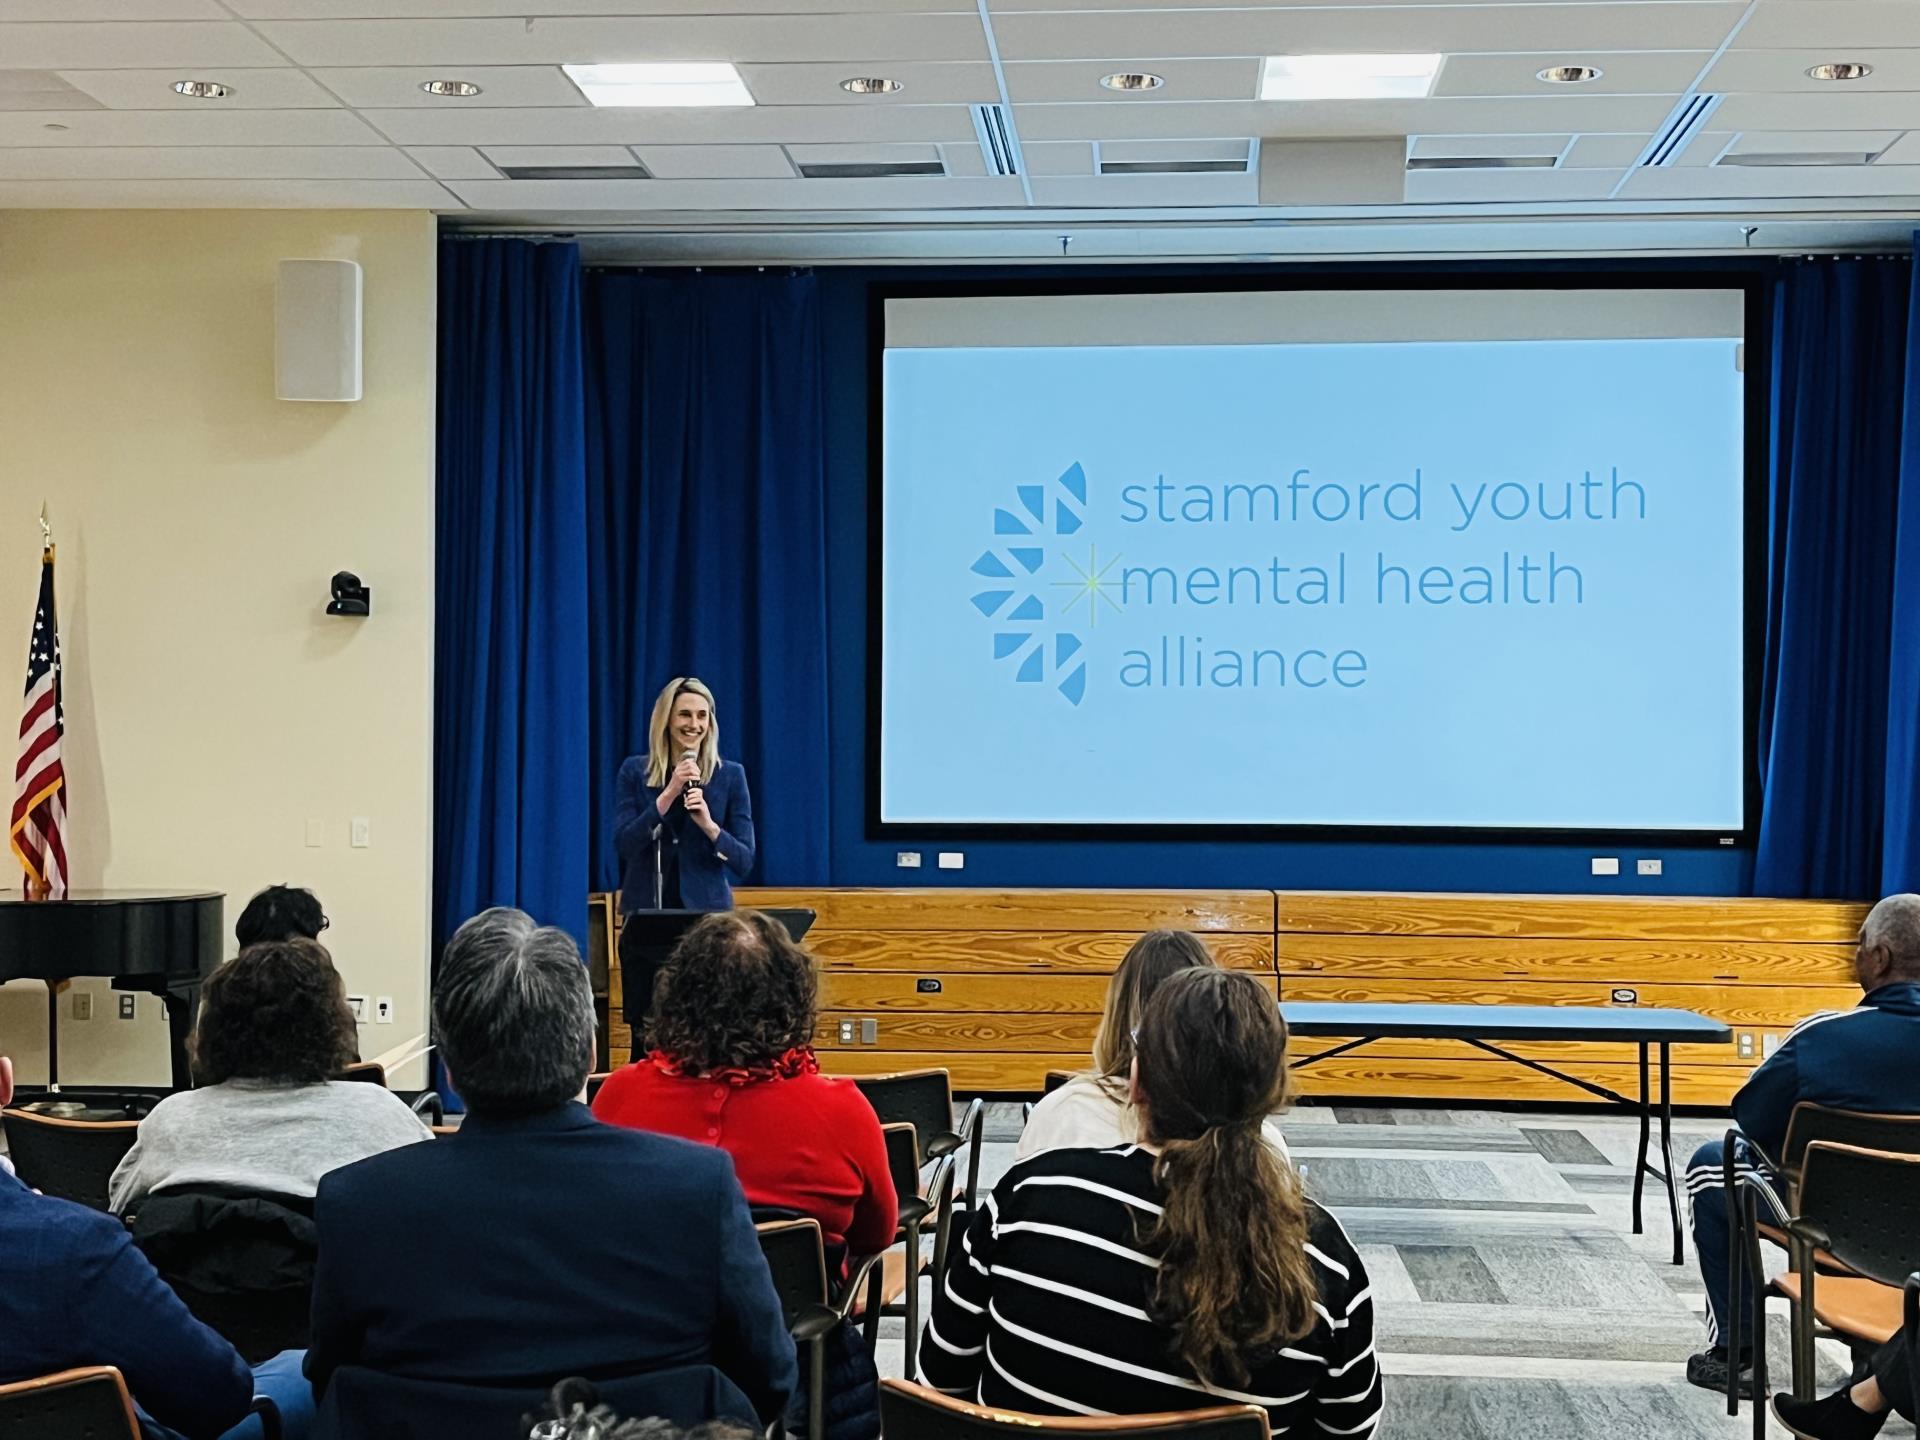 Mayor Simmons speaks at a Youth mental health alliance event